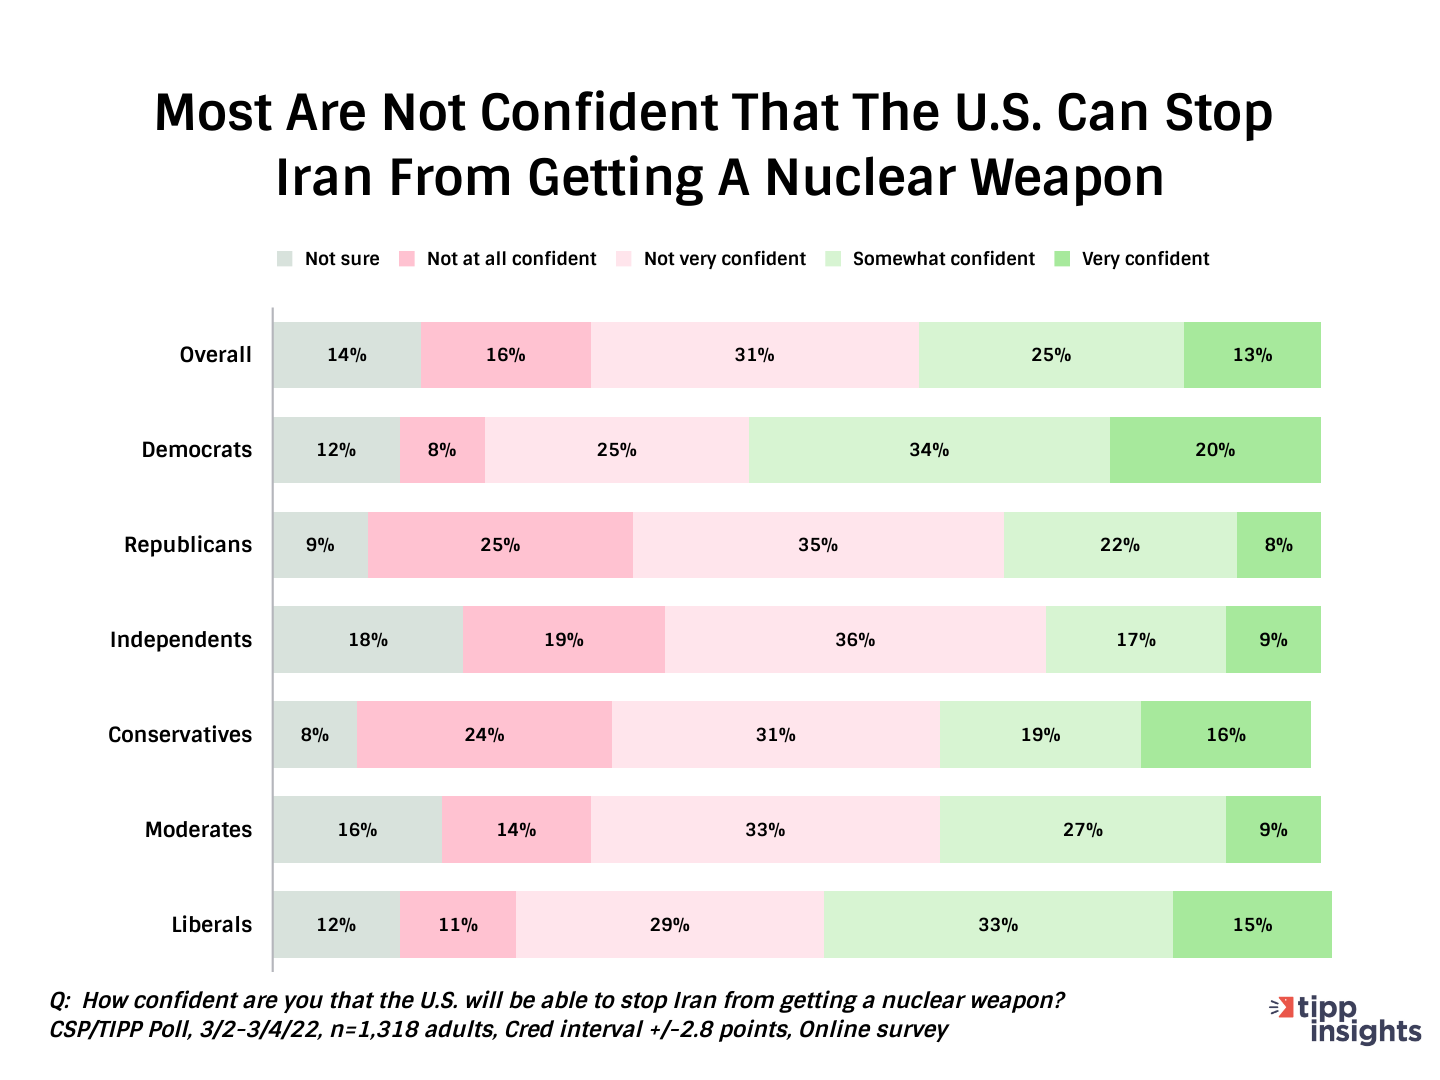 More are not confident that the U.S. can stop Iran from getting a nuclear weapon.